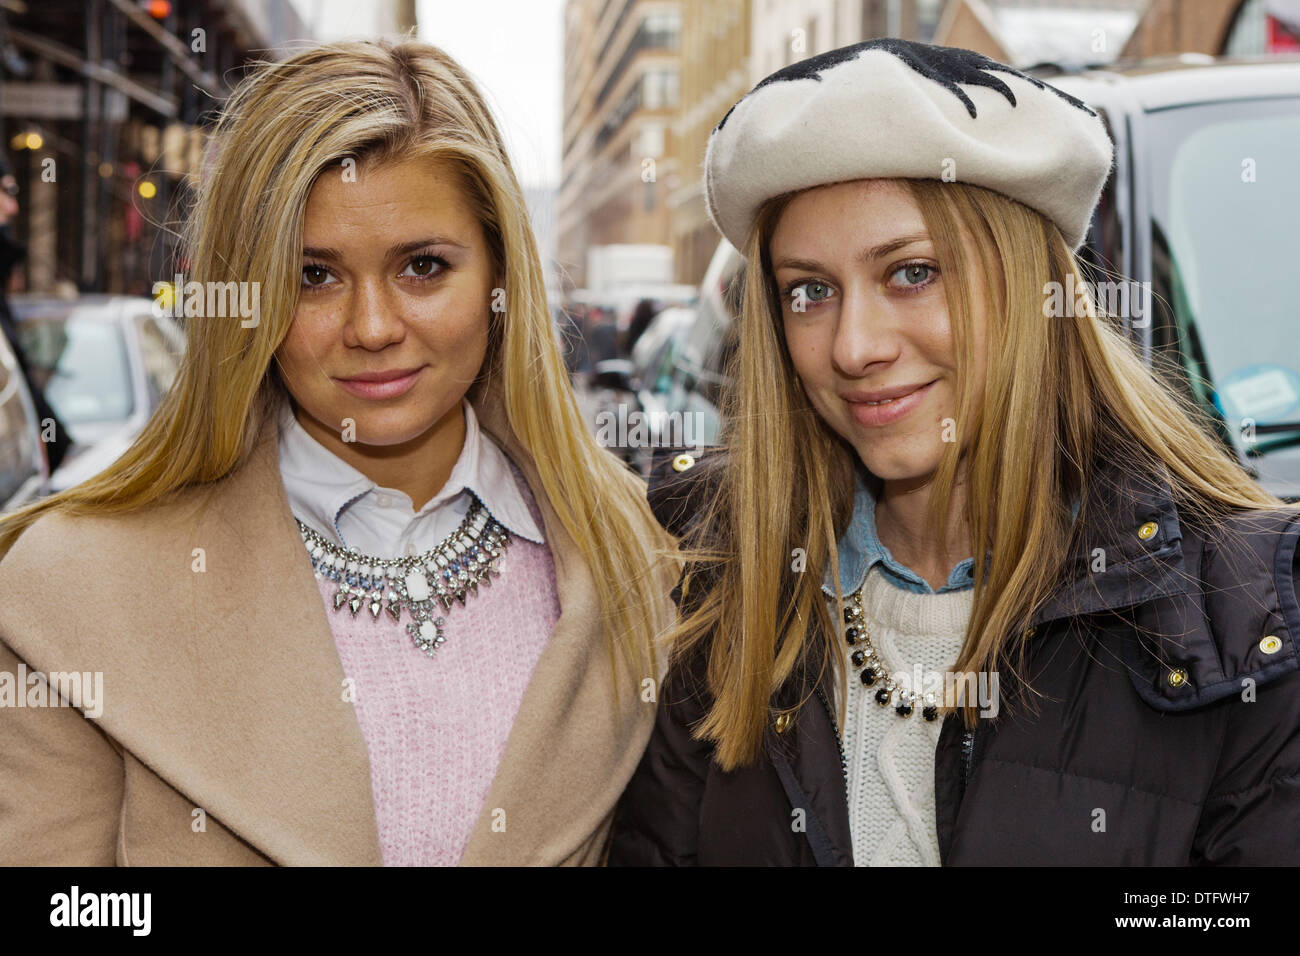 Alison Norton and Ilana Saul posing in the streets during Fashion Week in New York City - Feb 9, 2014 - Photo: Runway Manhattan/Thomas B. Ling/picture alliance Stock Photo